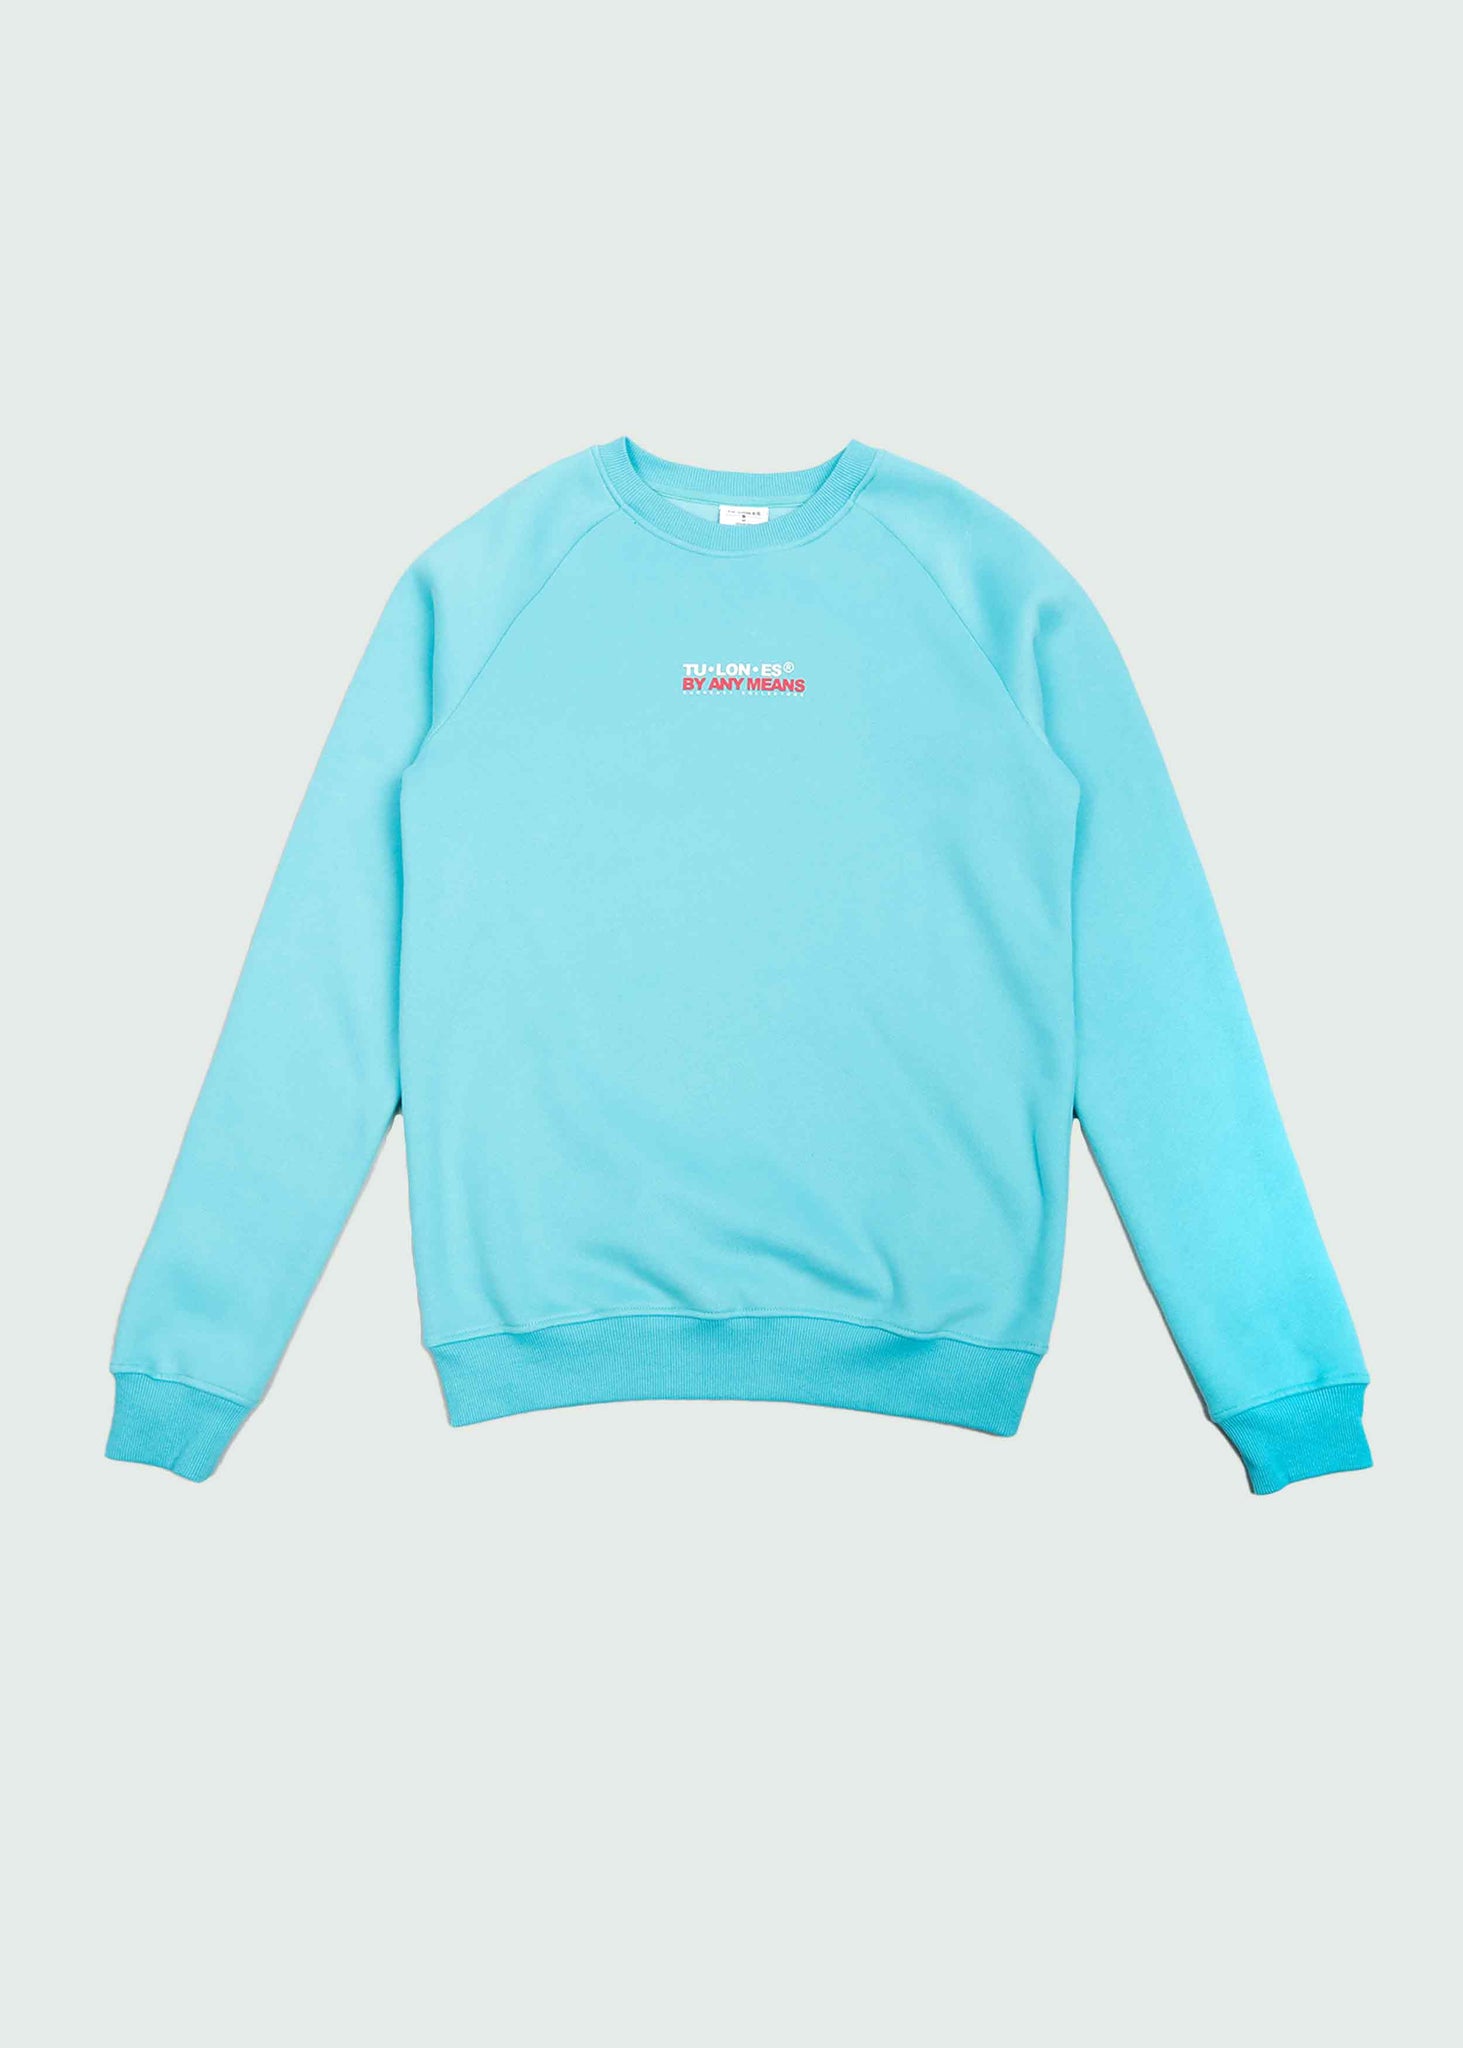 Blue Tulones By Any Means Crewneck